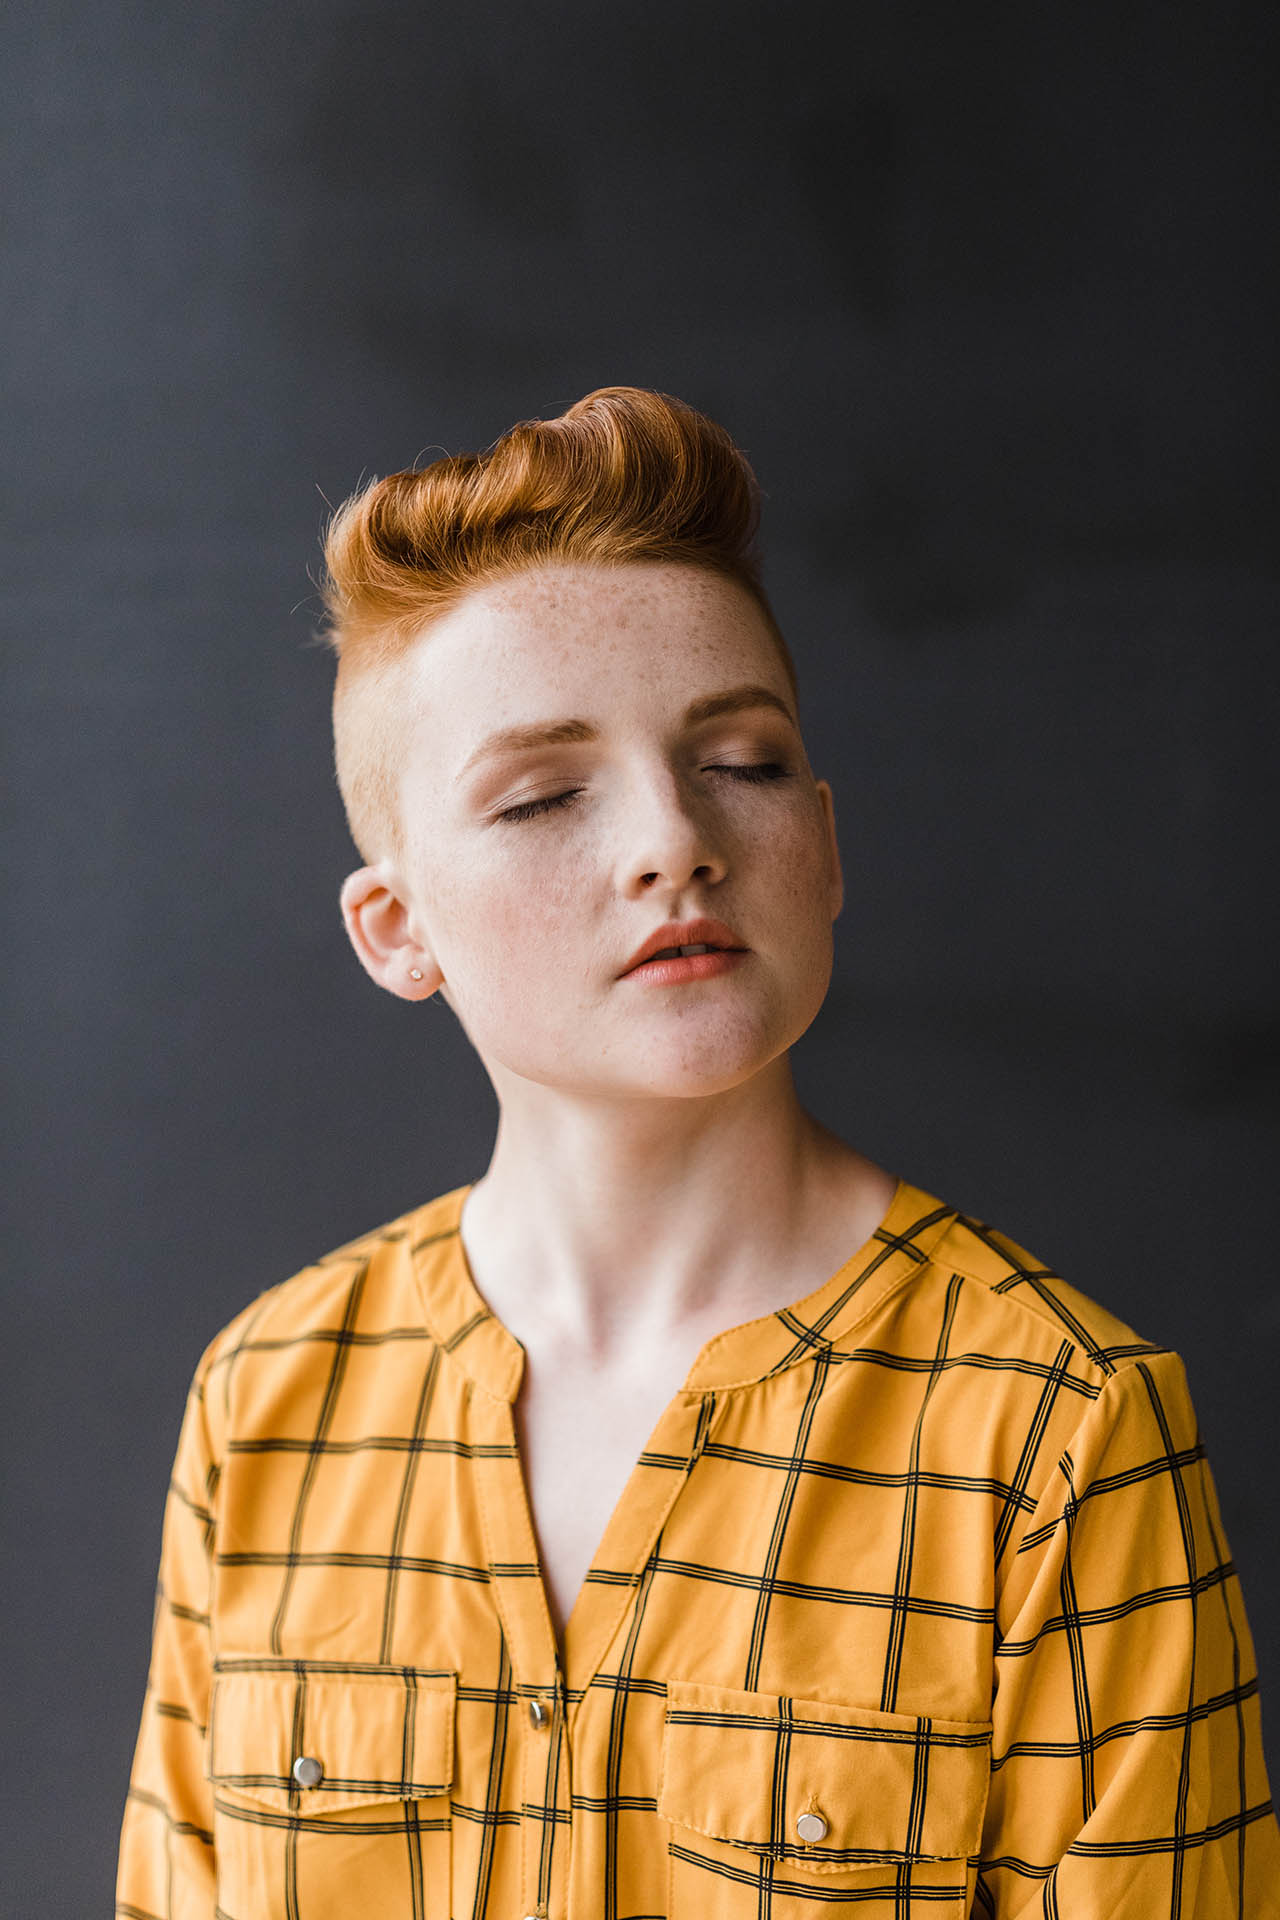 Fashion editorial photography; close up of a teenager wearing makeup and an orange and black striped shirt with closed eyes and slightly parted lips in front of a dark background